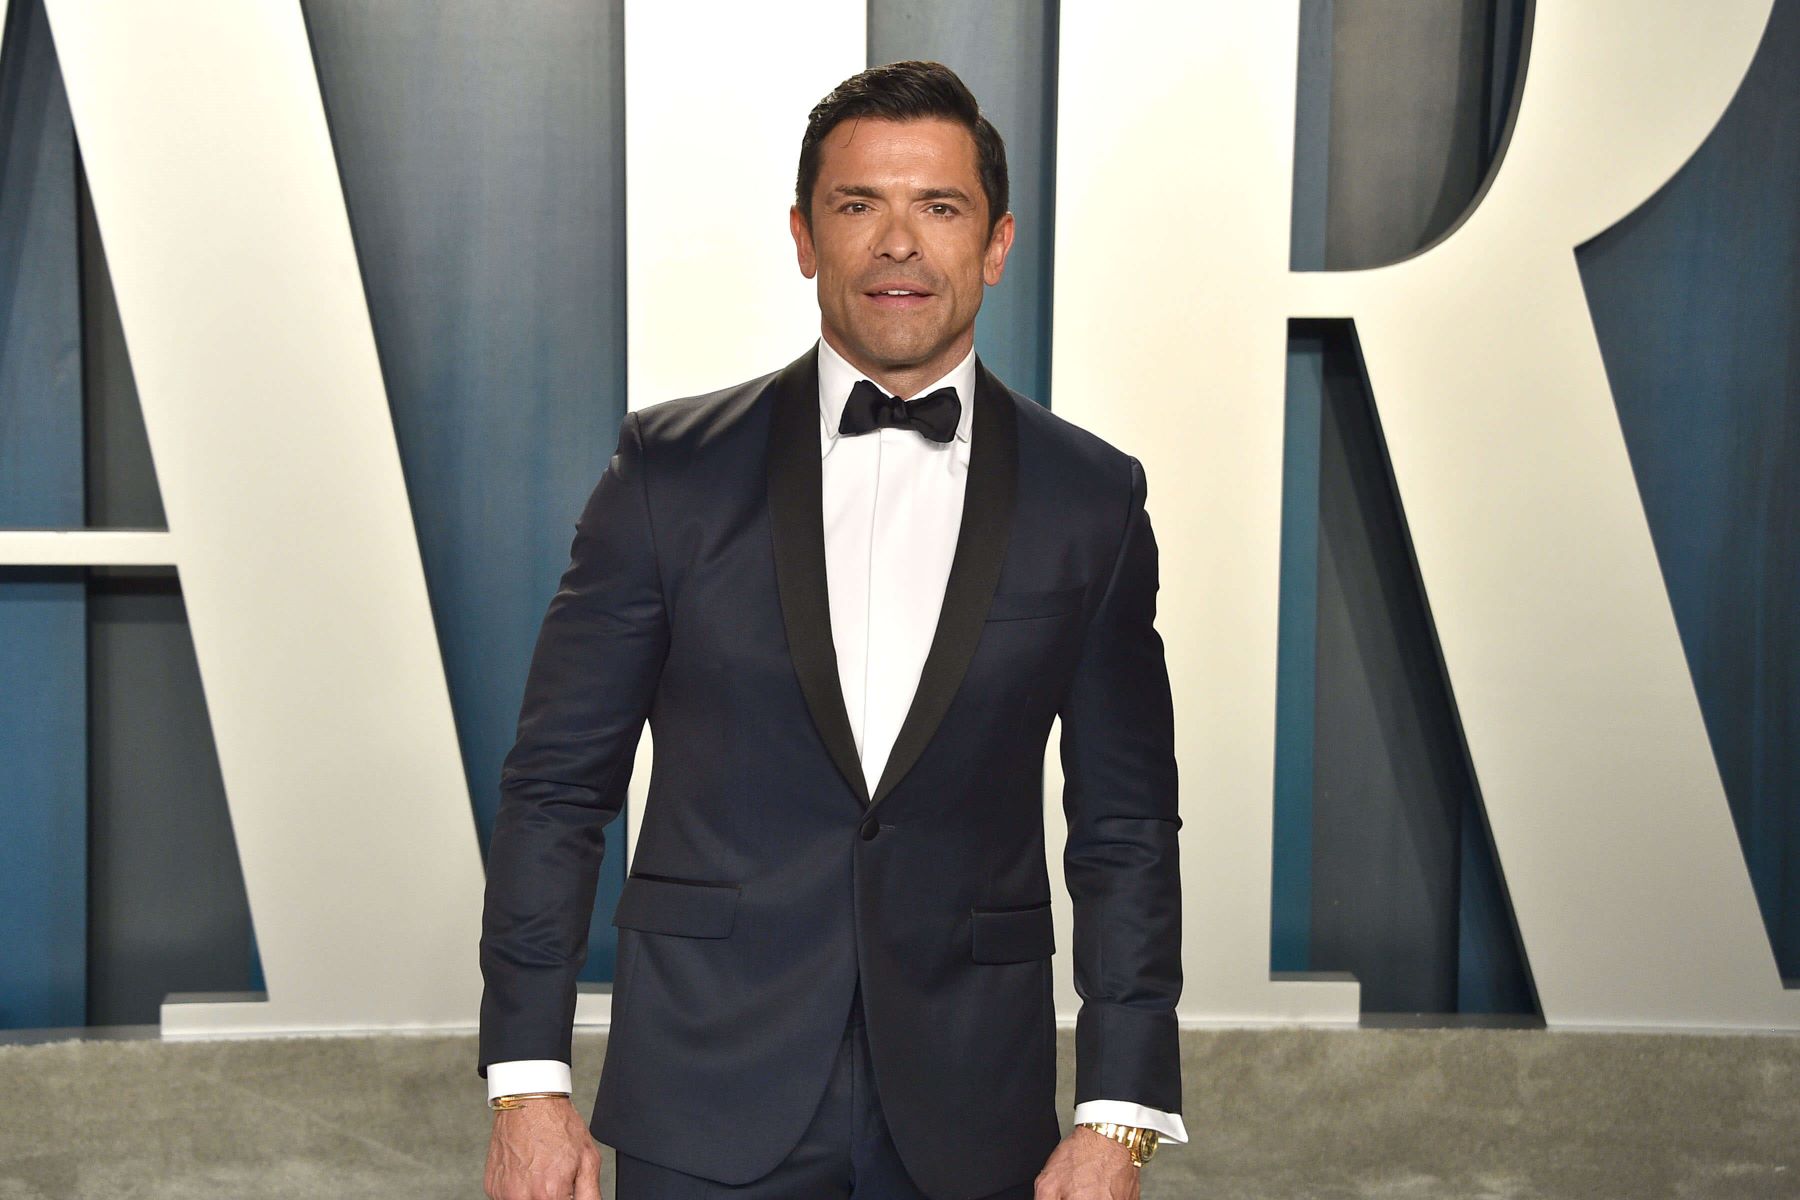 Mark Consuelos, who appears in 'How I Met Your Father' Season 2, wears a dark blue tux